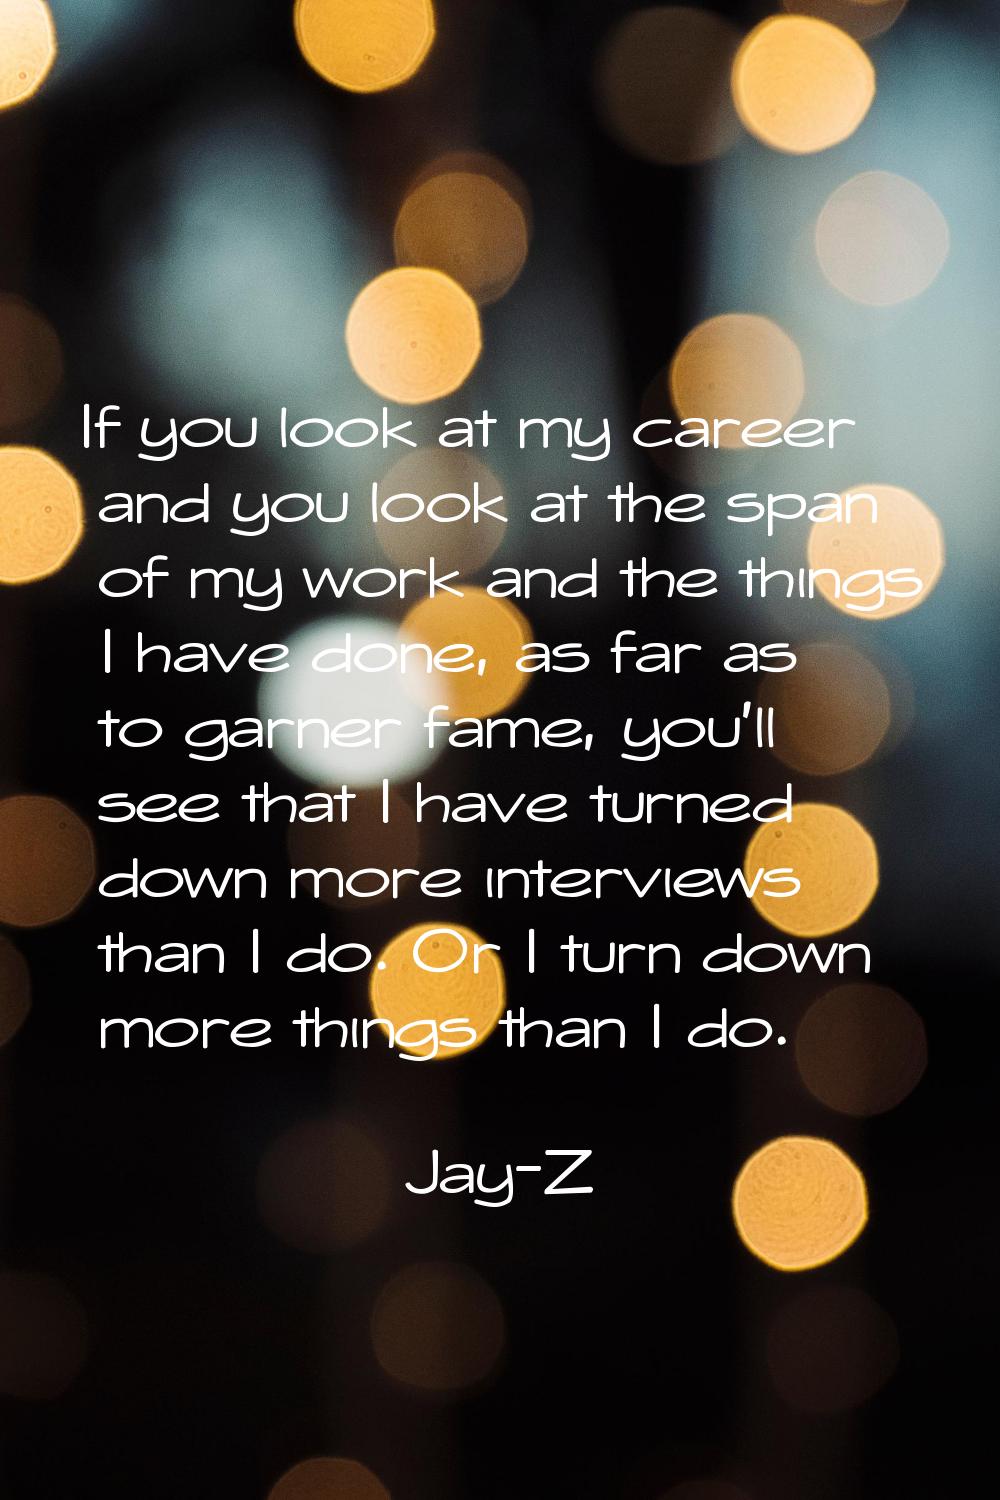 If you look at my career and you look at the span of my work and the things I have done, as far as 